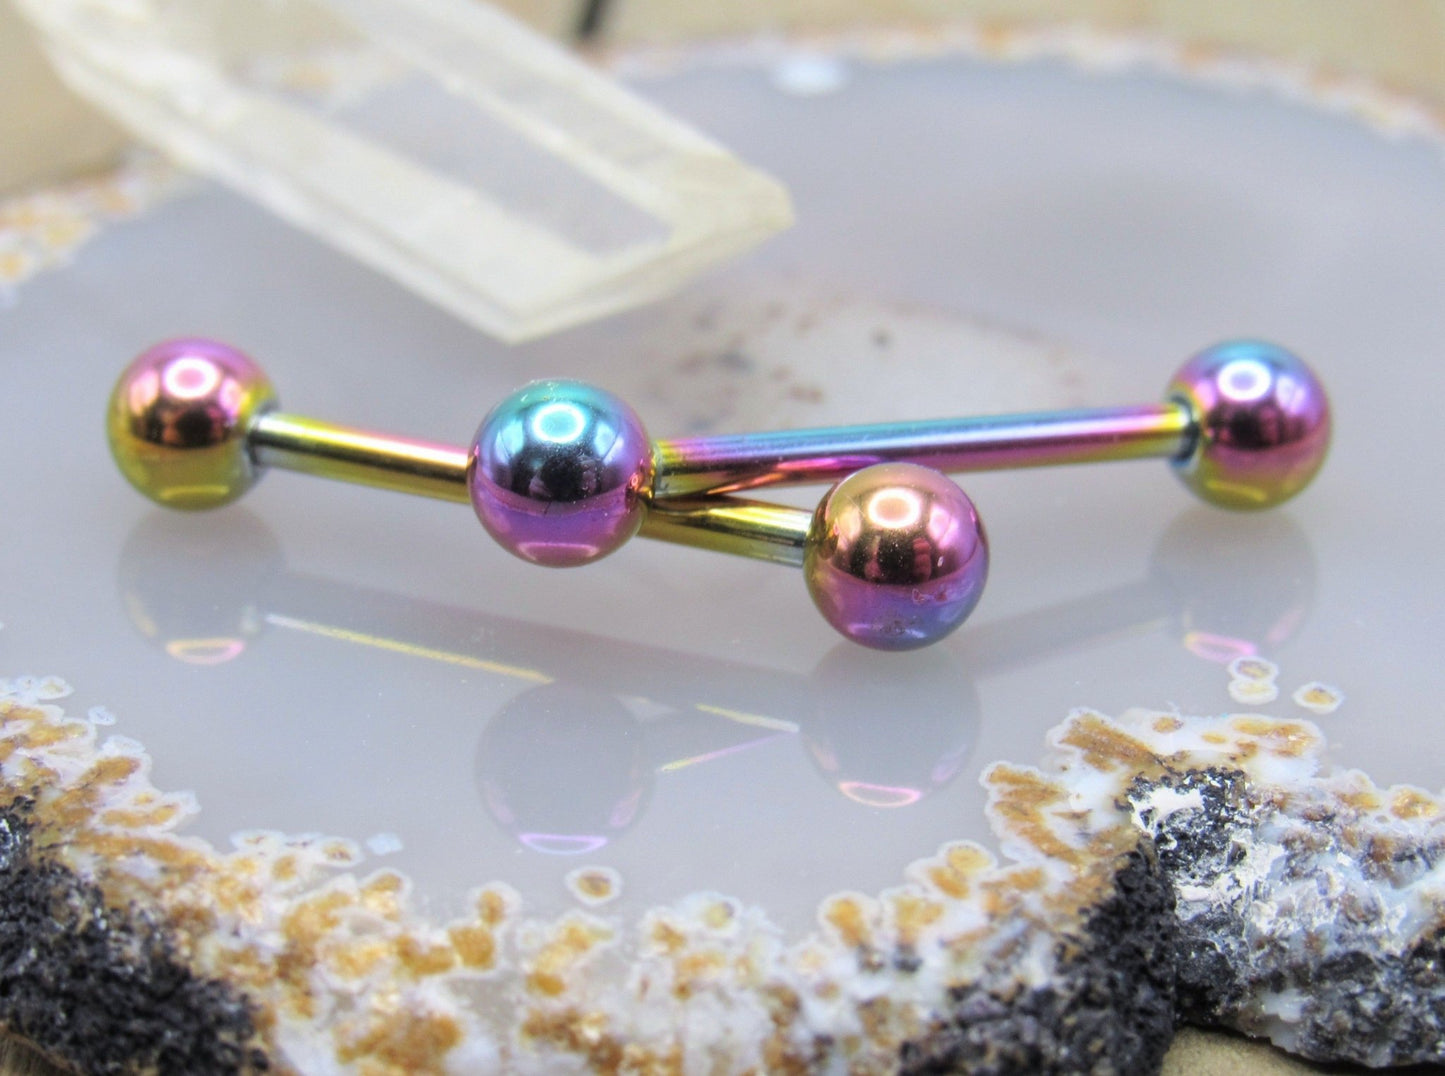 Rainbow nipple piercing rings 14g 5/8" stainless steel straight bars 5mm ball ends - Siren Body Jewelry